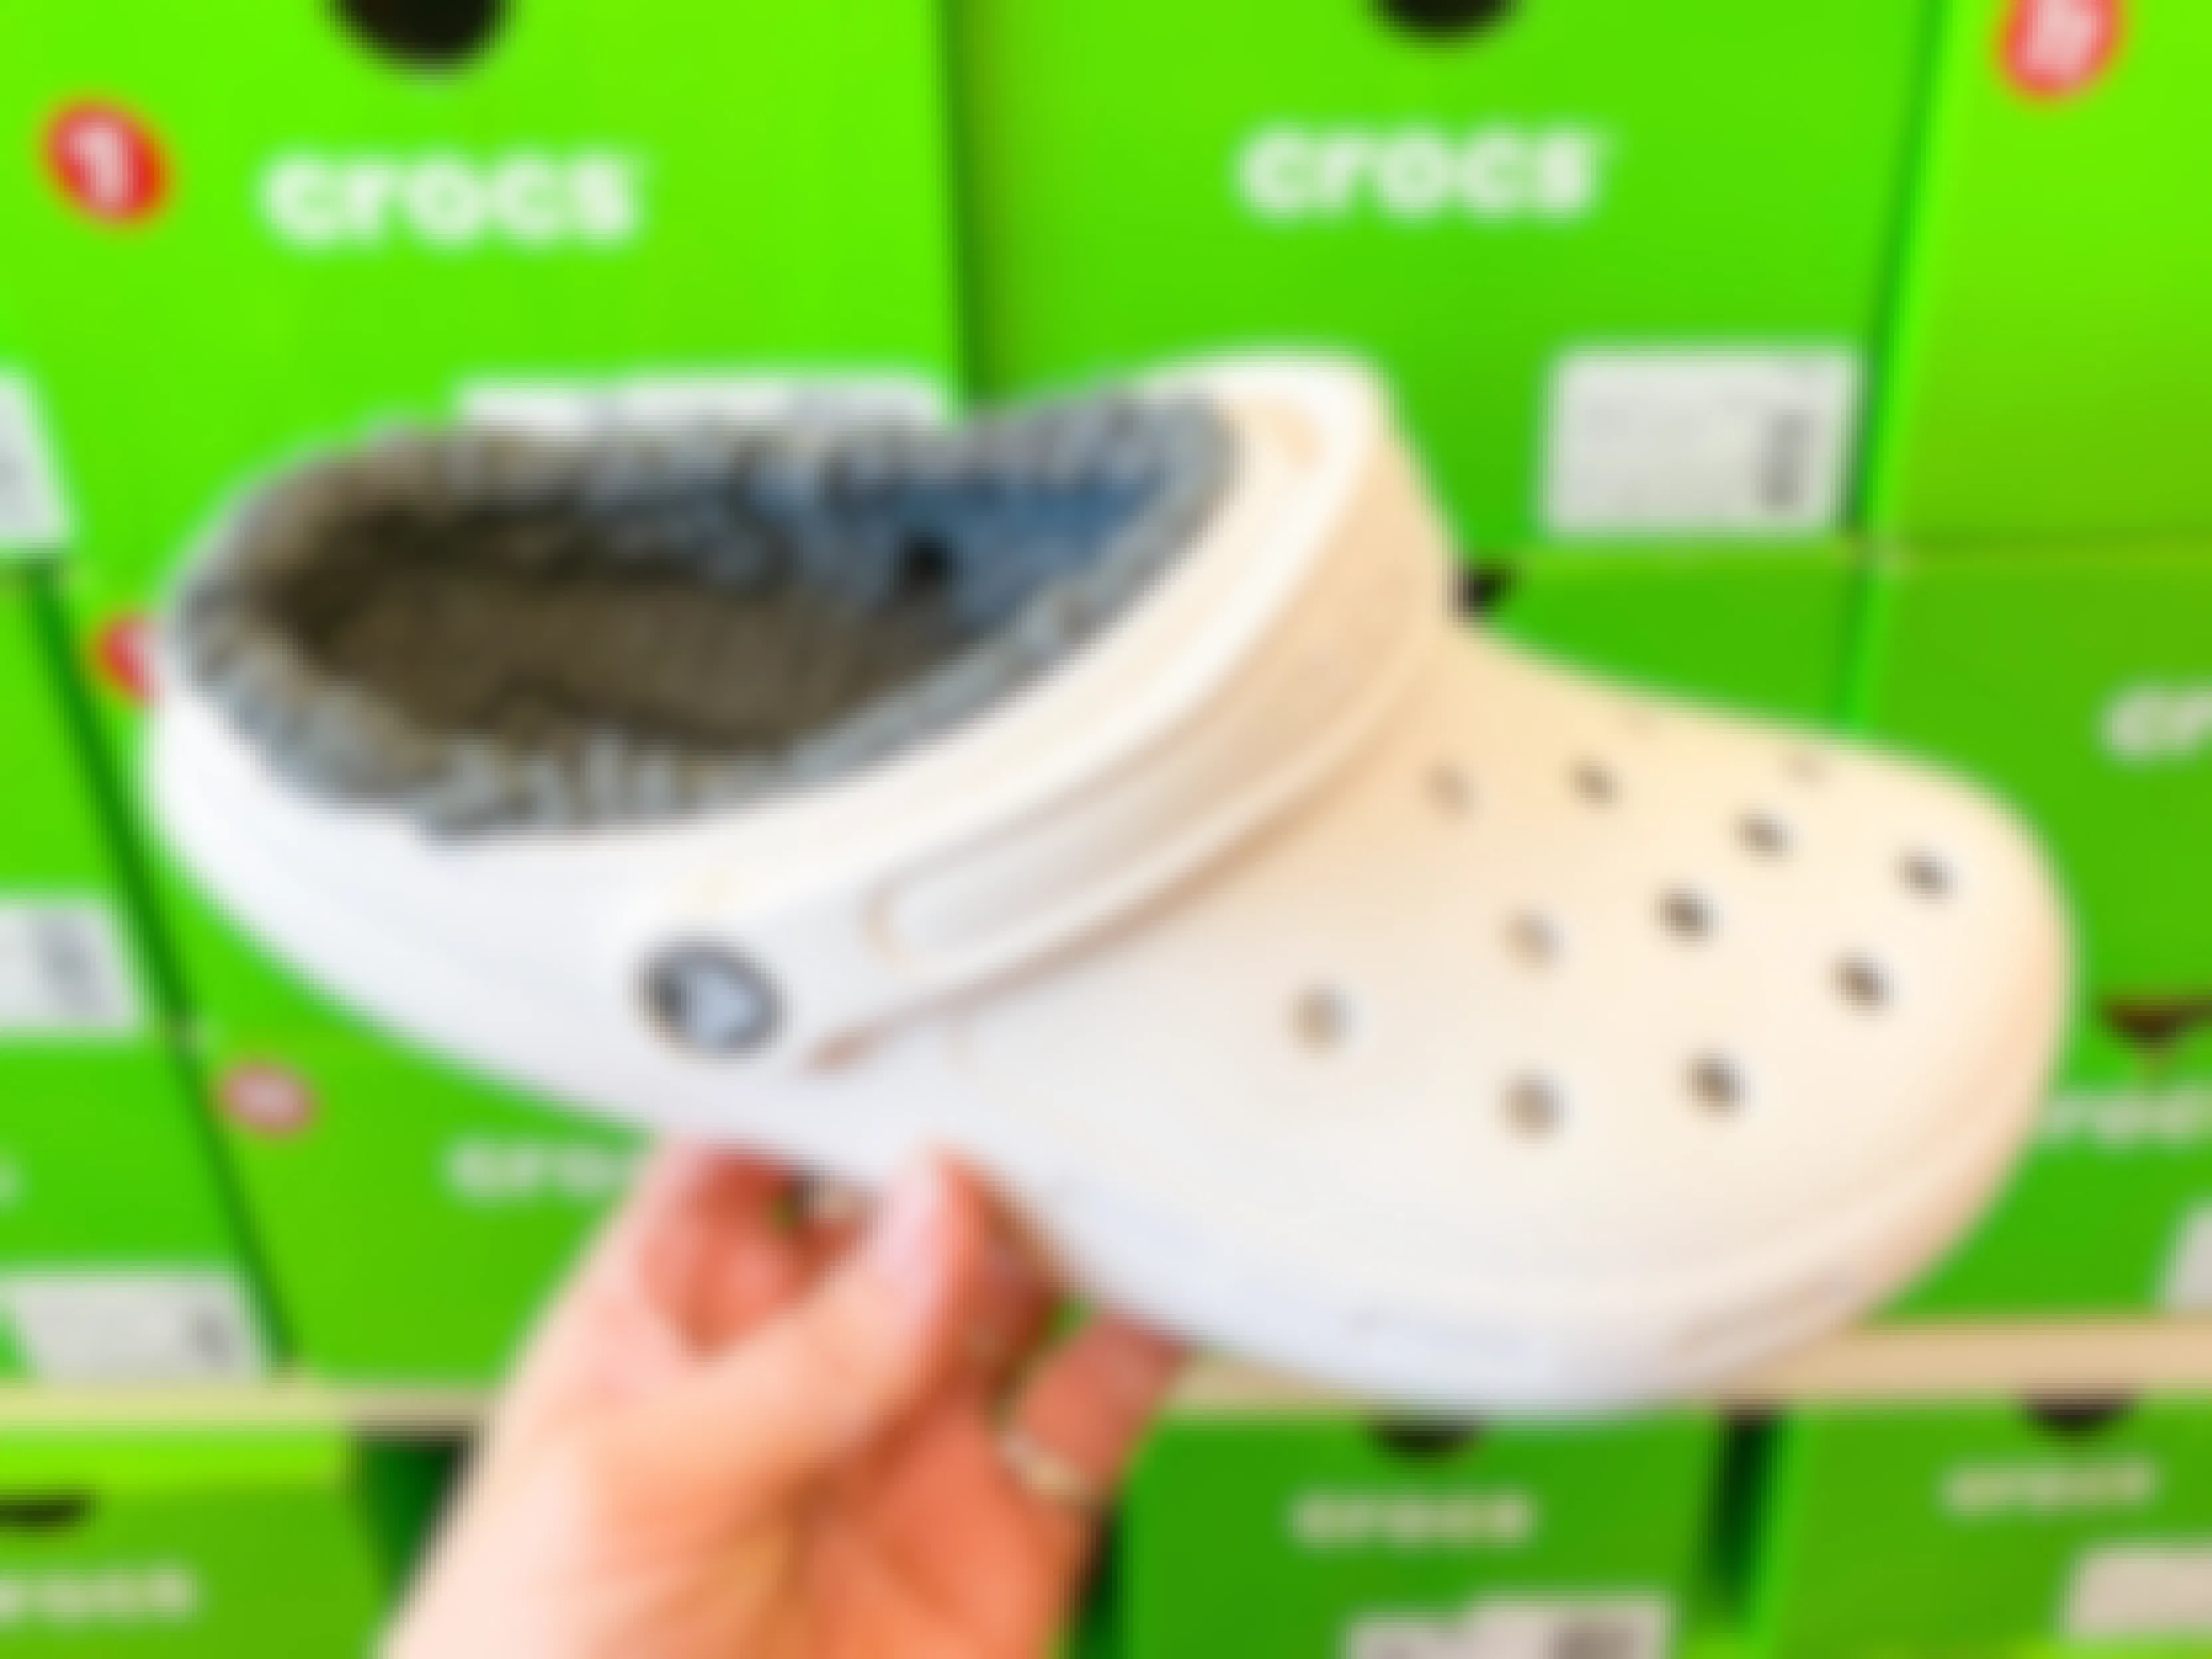 A person's hand holding a fuzzy Croc clog in a shoe store.